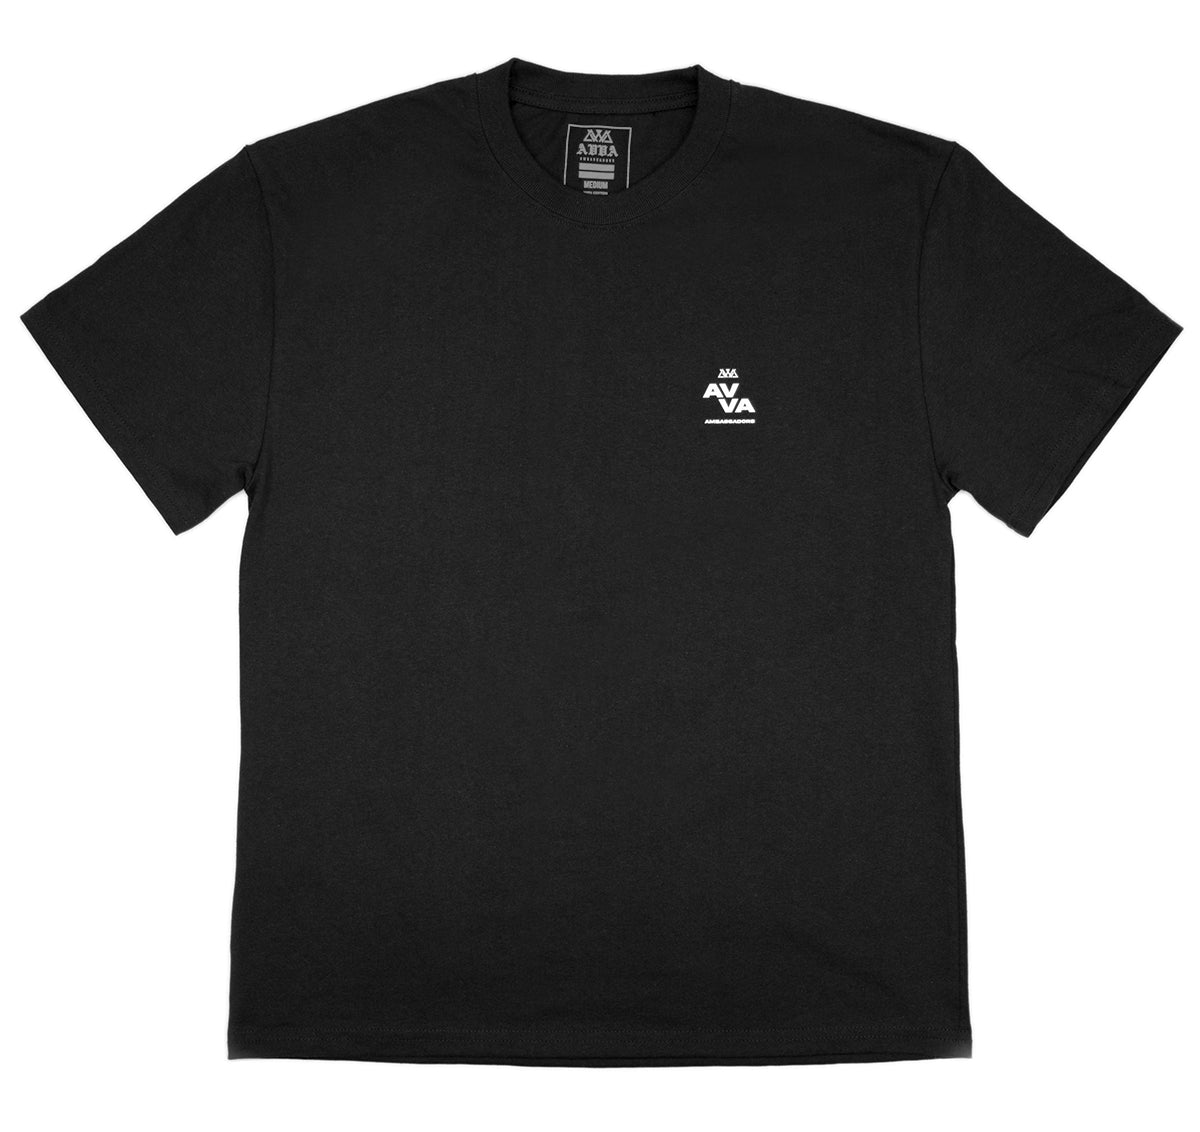 FRONT VIEW OF PACIFIC DRIFT TEE. HEAVYWEIGHT TEE WITH SMALL AVVA LOGO AMBASSADORS IN THE TOP RGHT CORNER.